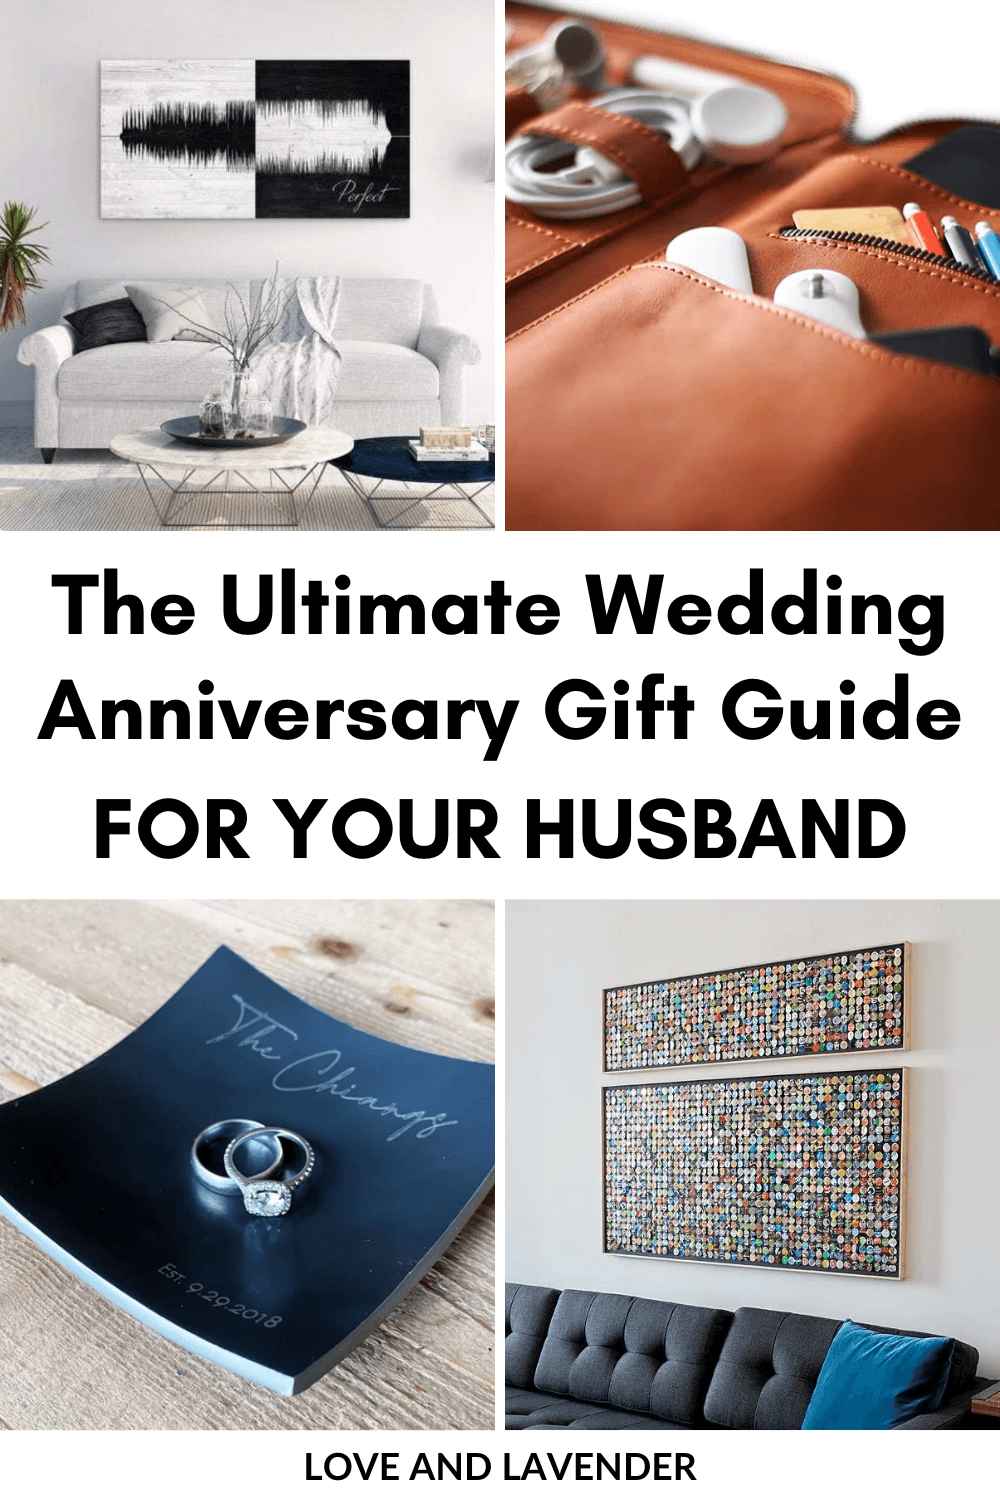 20 Thoughtful Anniversary Gift Ideas for Him